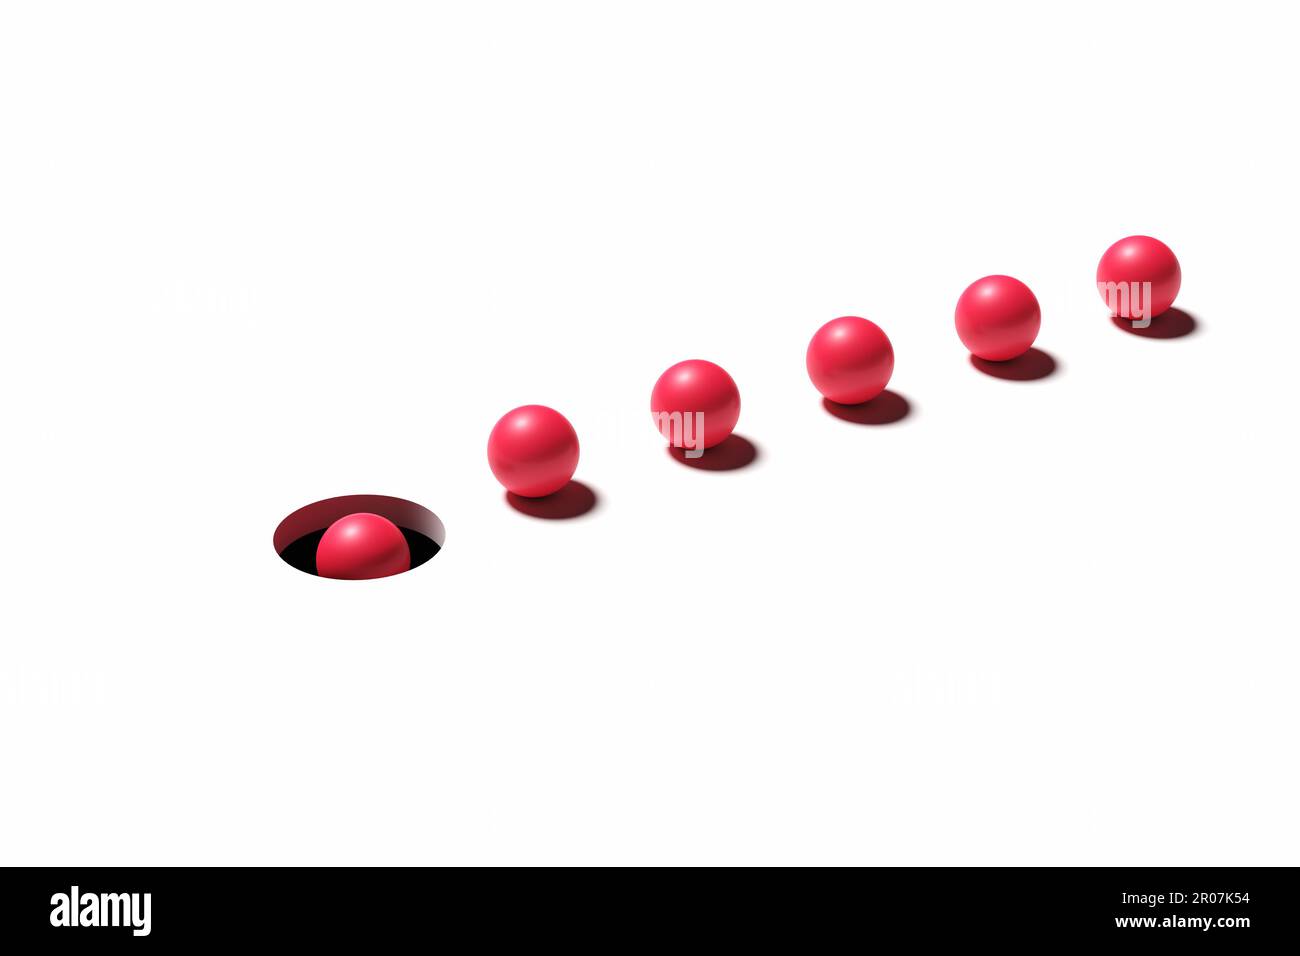 Bad leadership and blind conformity concepts. Red balls in a row following the leader towards the dark hole. 3D render. Stock Photo